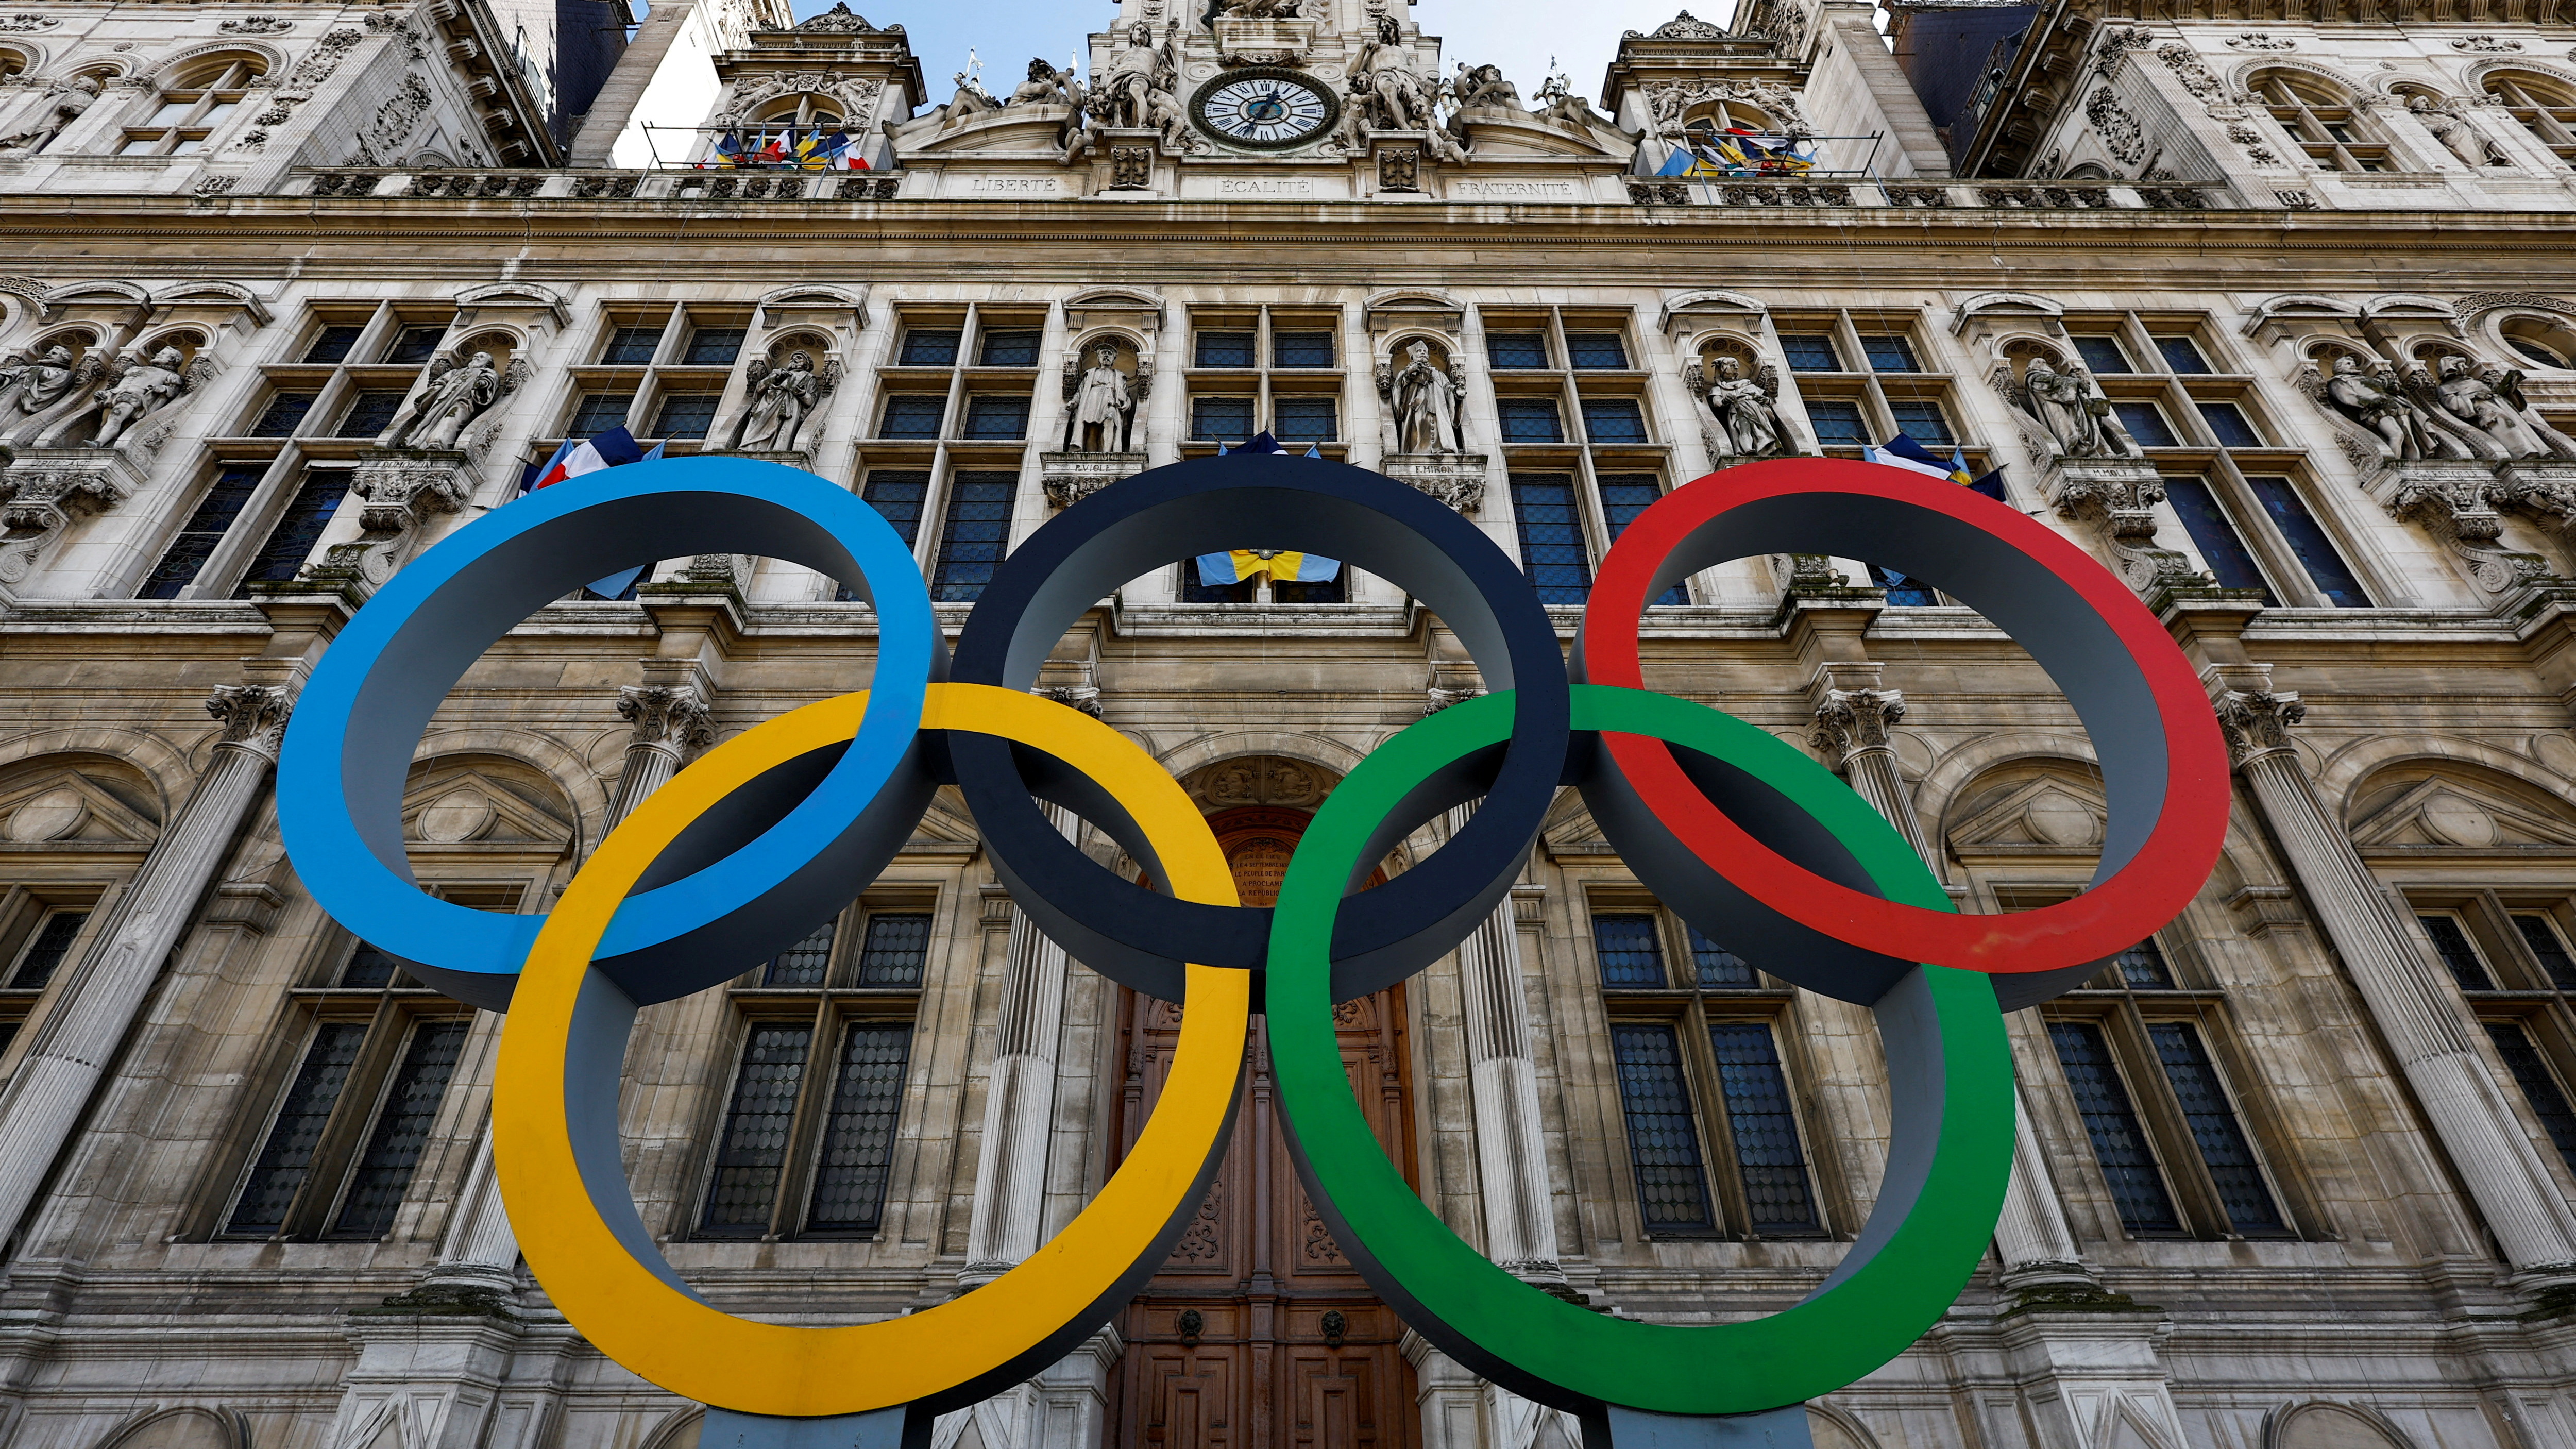 Paris's Hotel de Ville City Hall displays the Olympic rings ahead of the arrival of the Games this summer. /Gonzalo Fuentes/Reuters